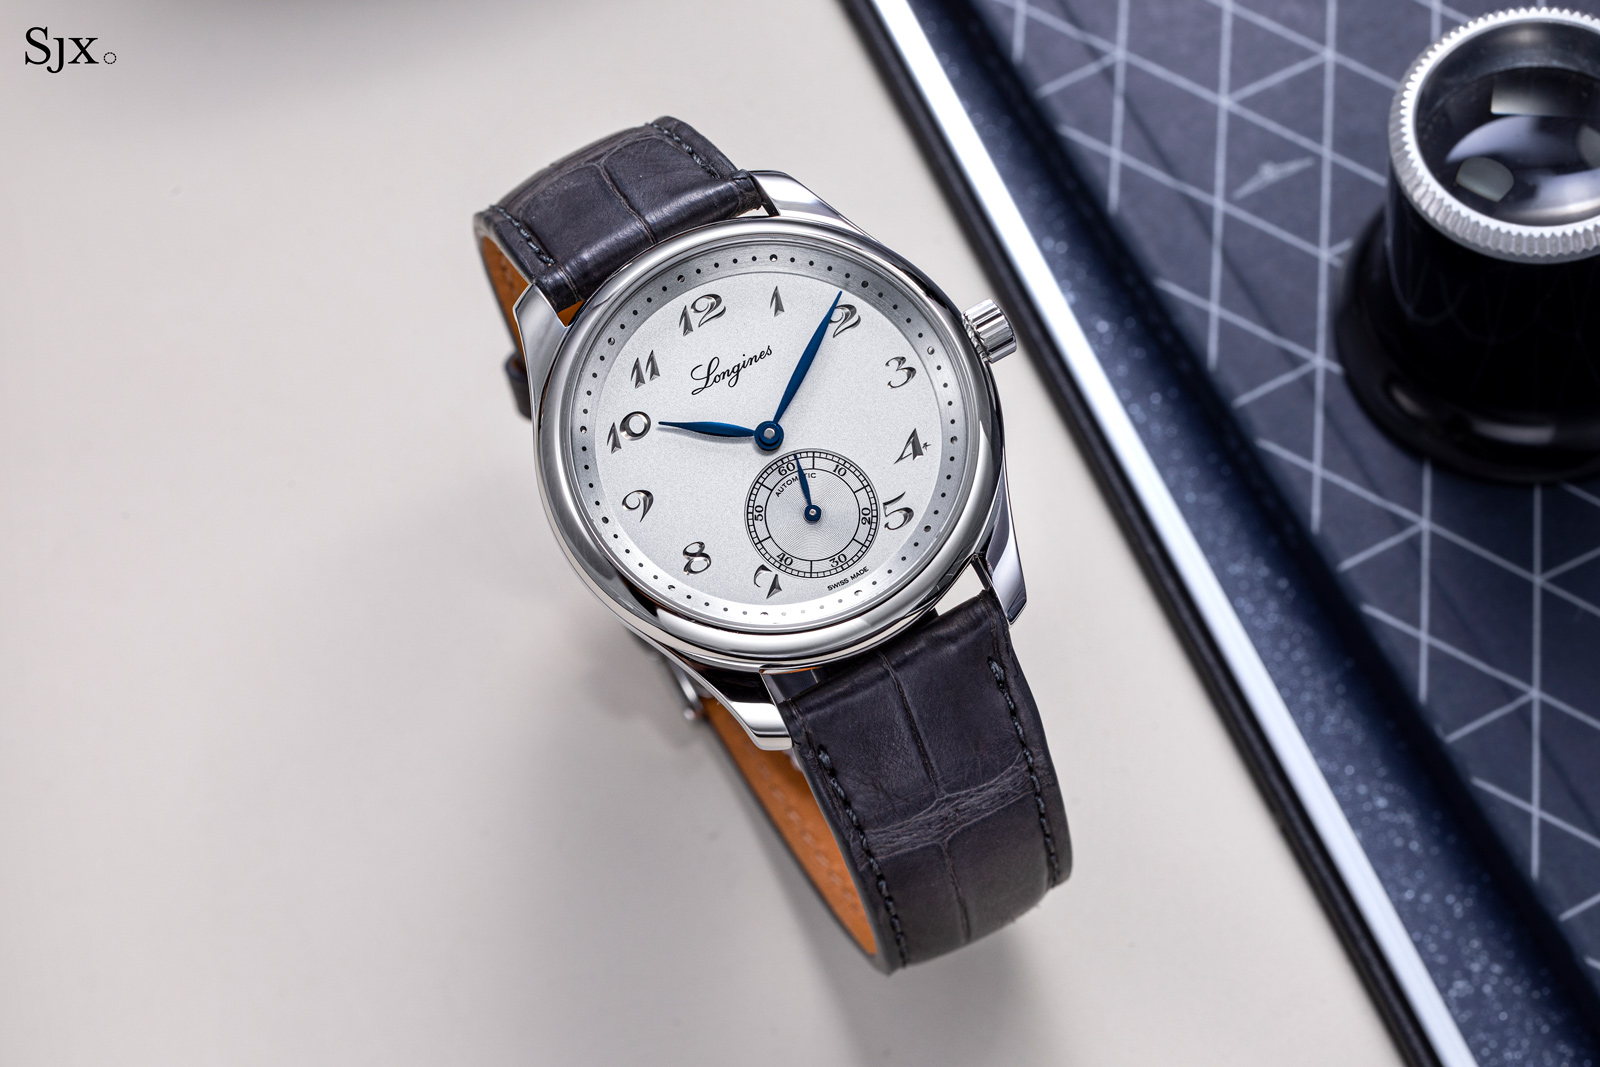 Hands On: Longines Master Collection Small Seconds | SJX Watches